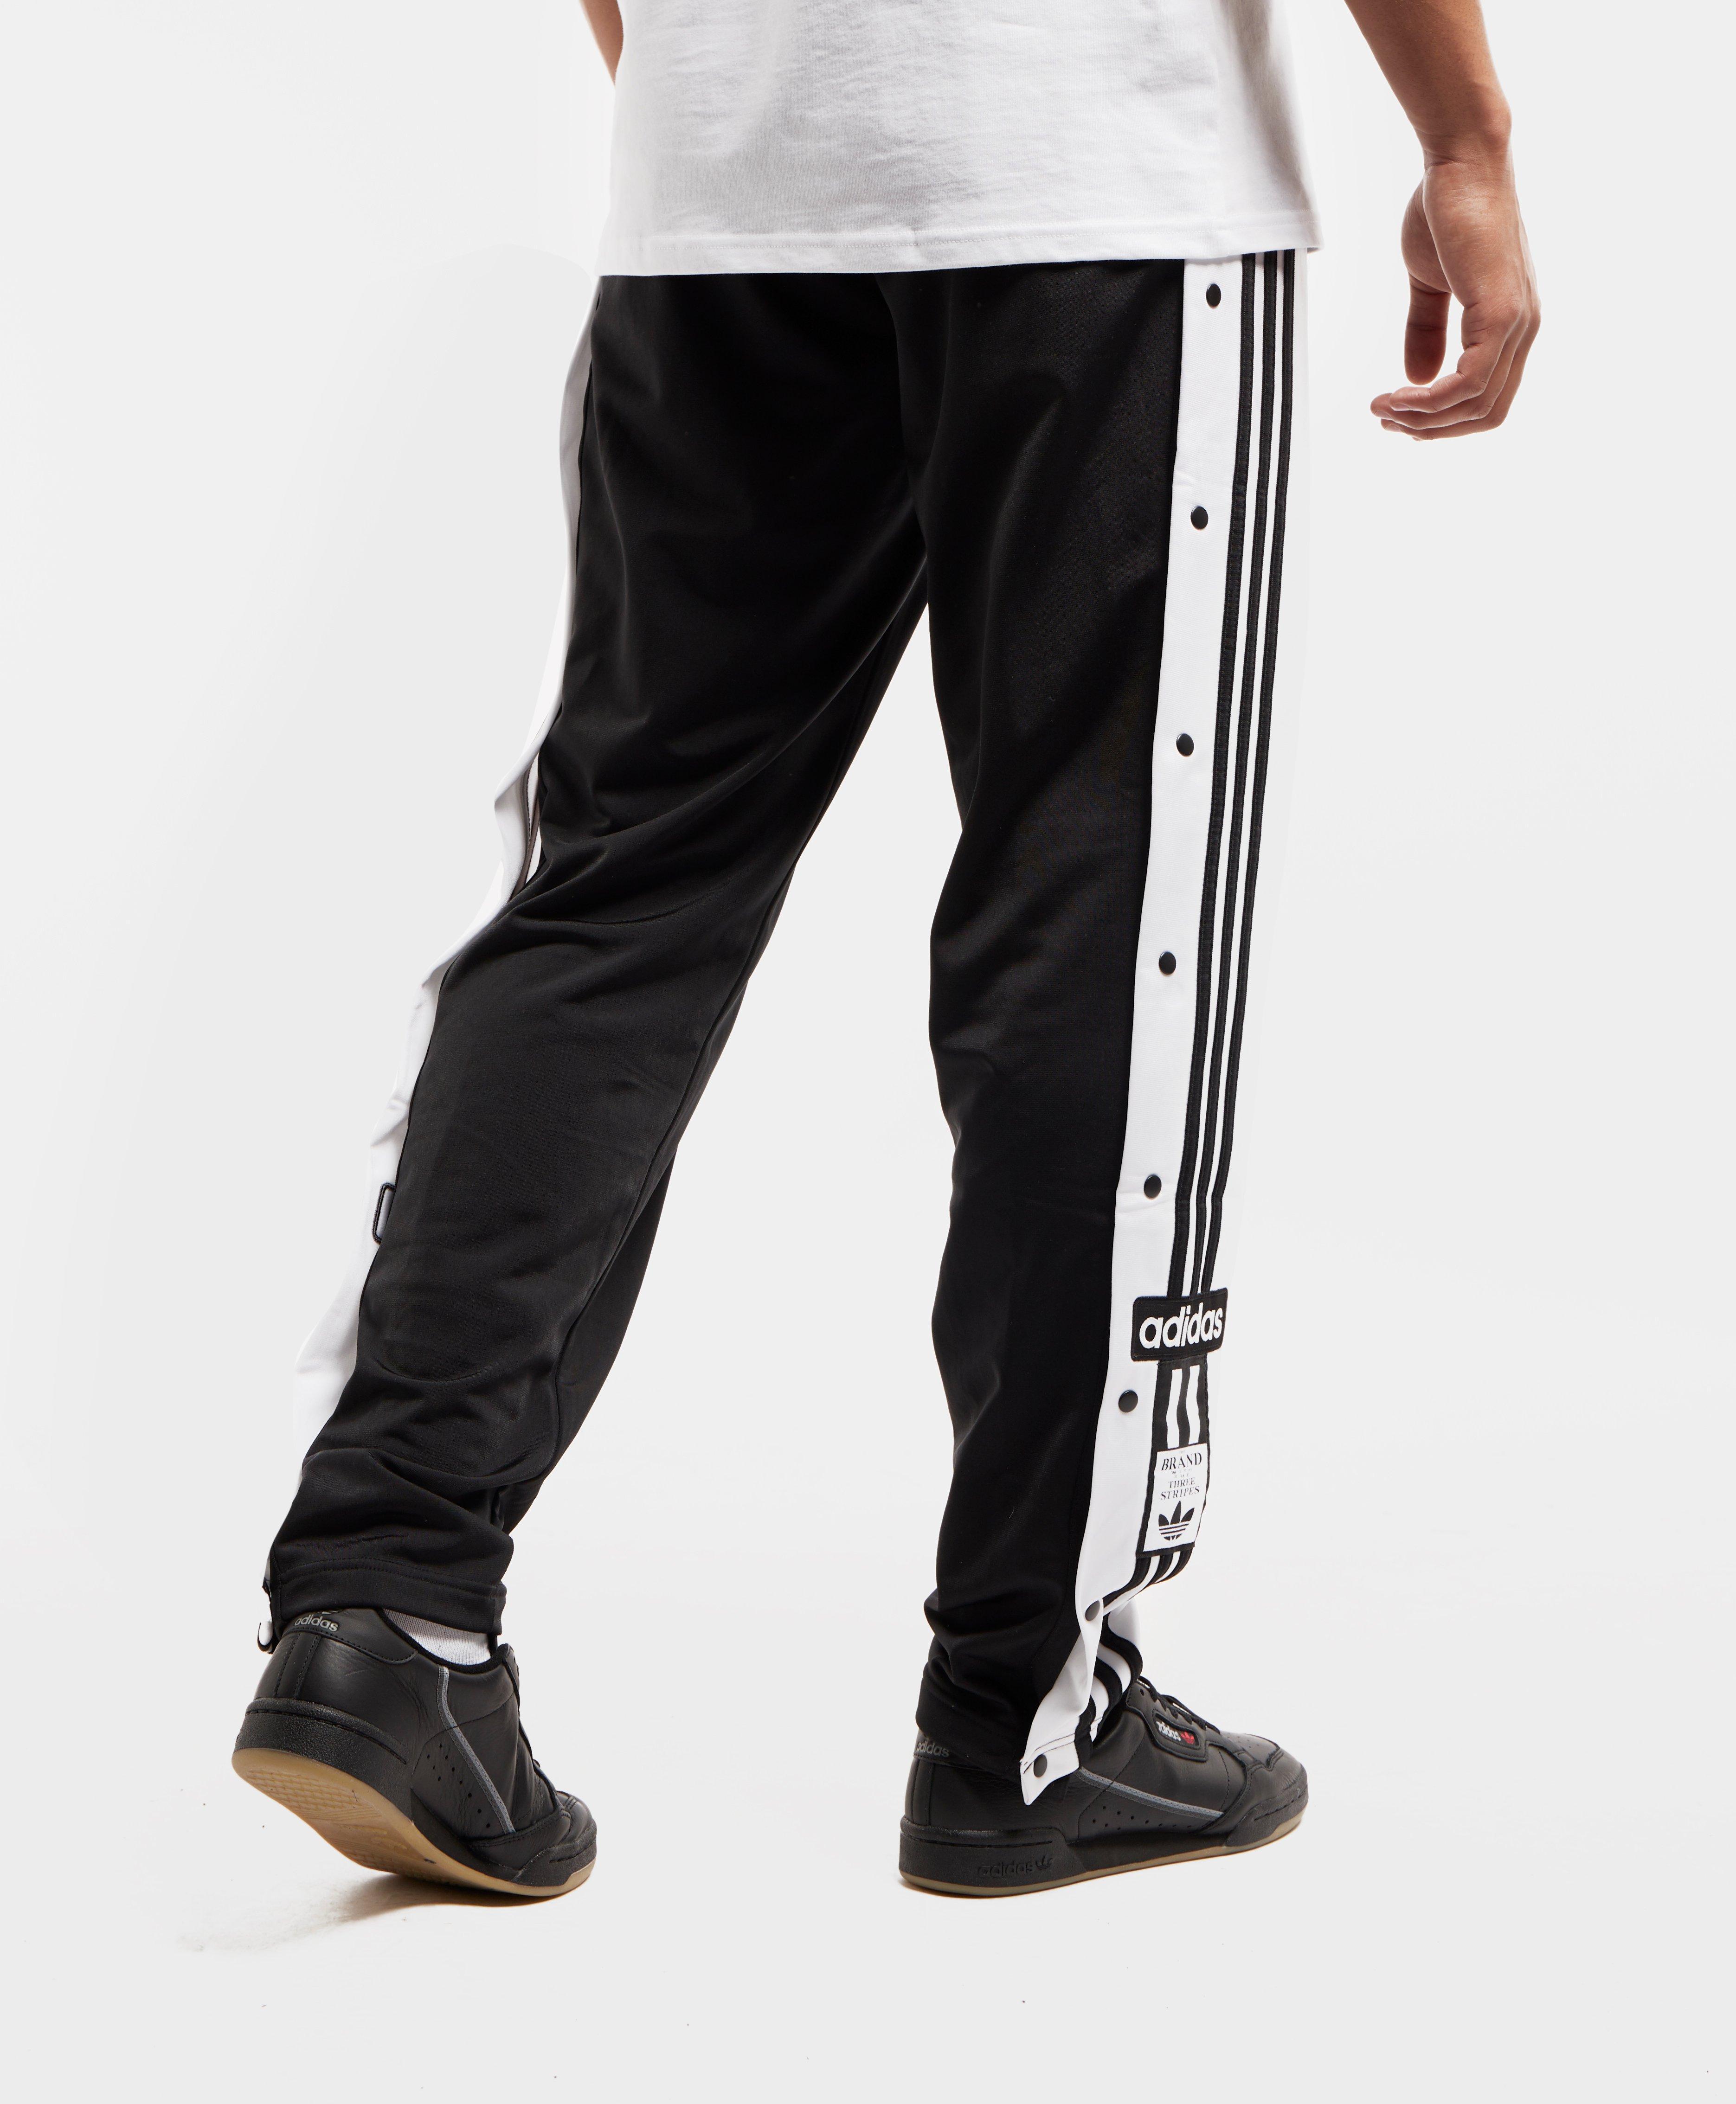 adidas track pants with buttons